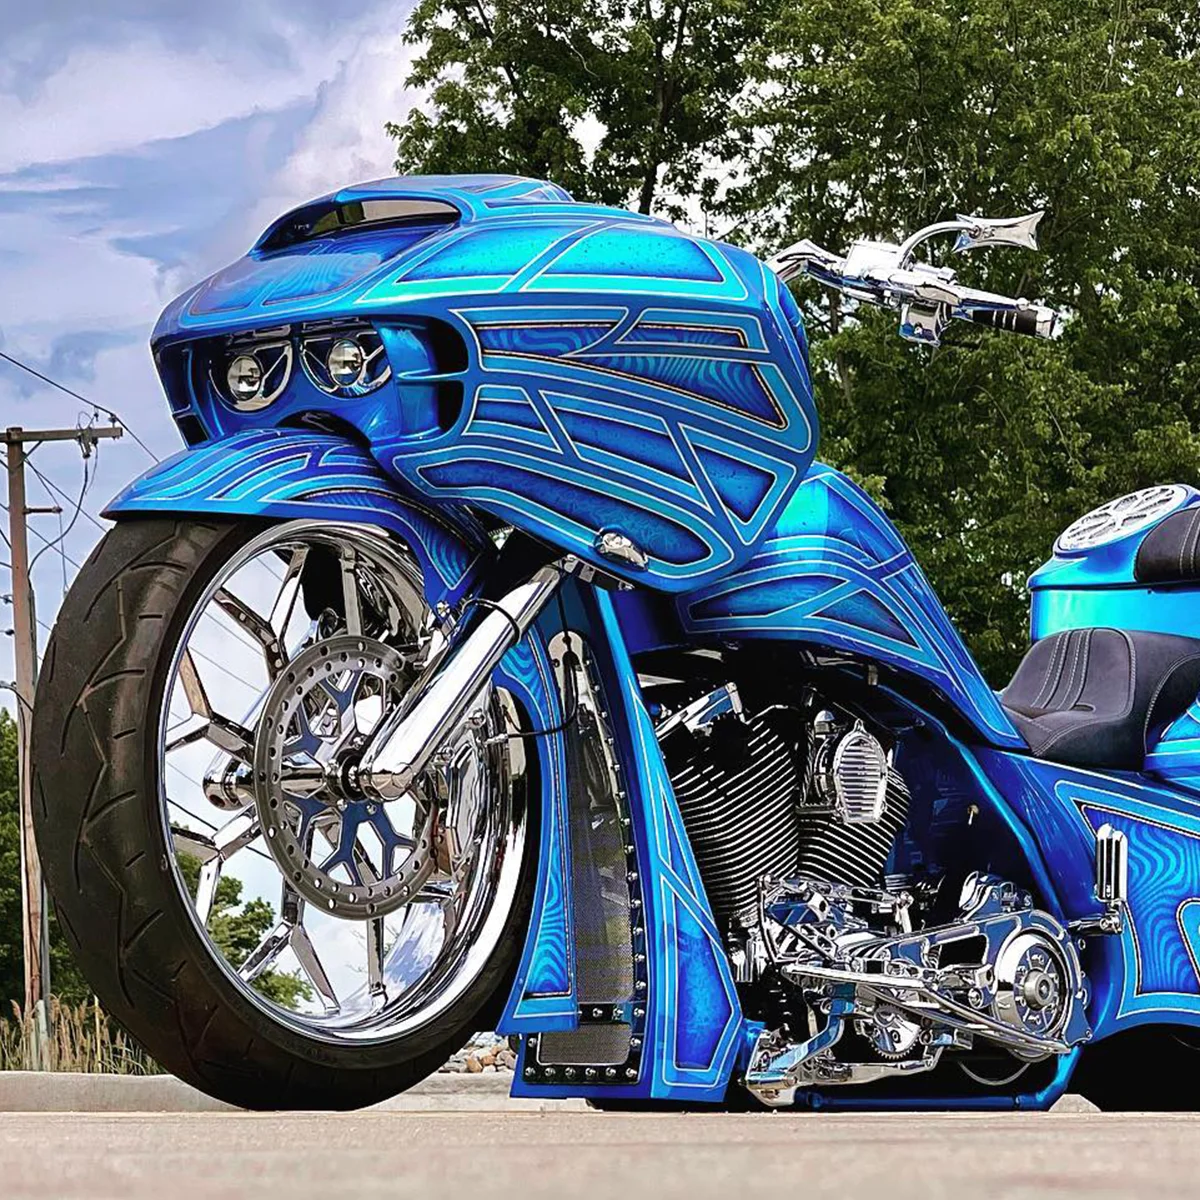 Harley Davidson Road Glide bagger motorcycle with our Bulldog Deception fat tires